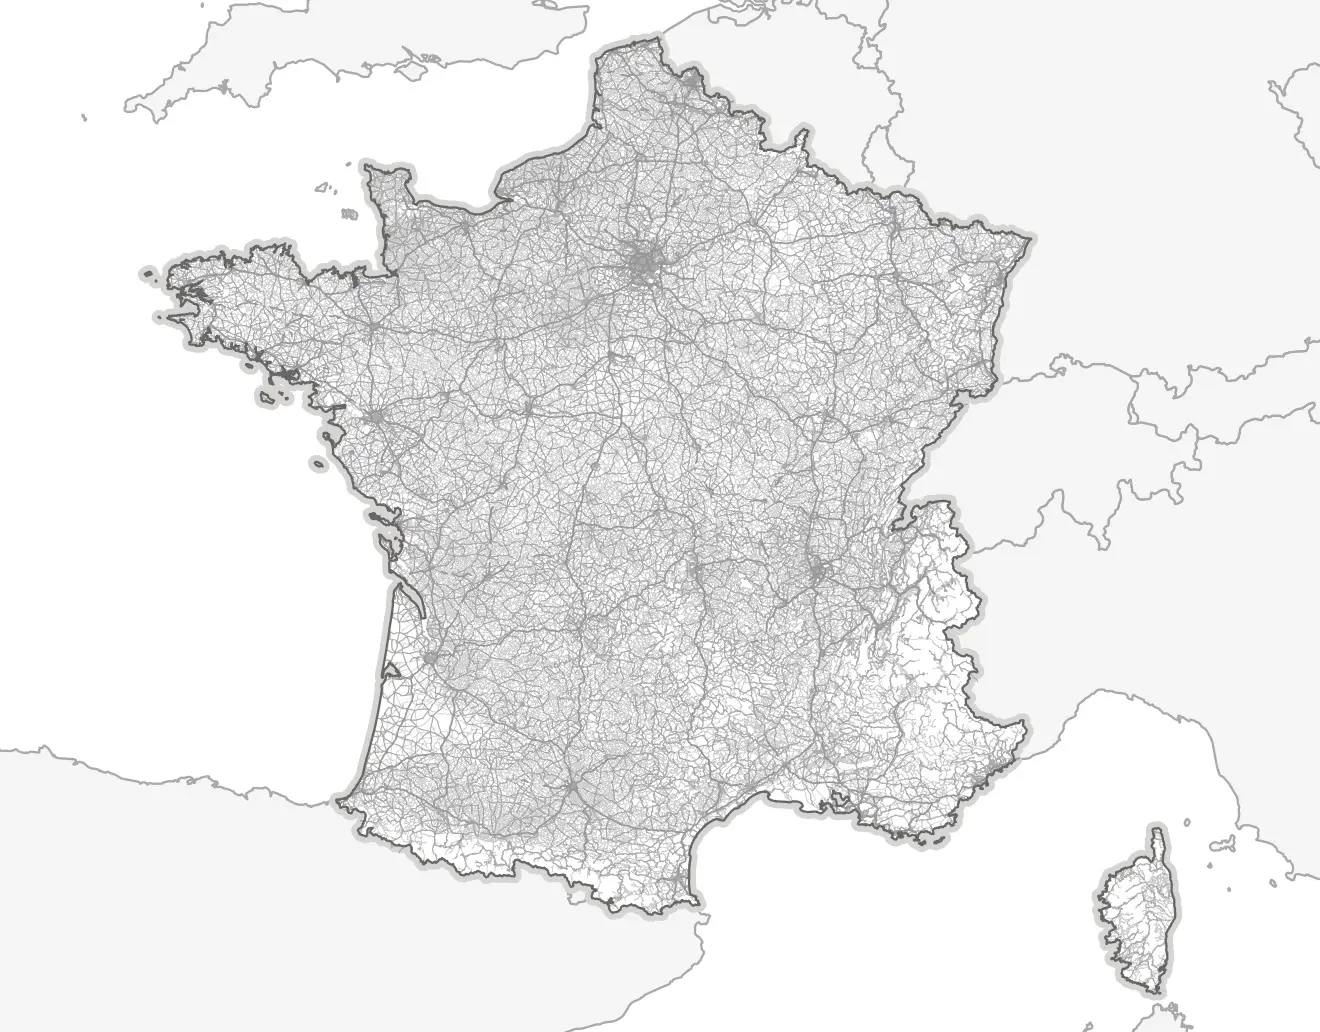 French roads network